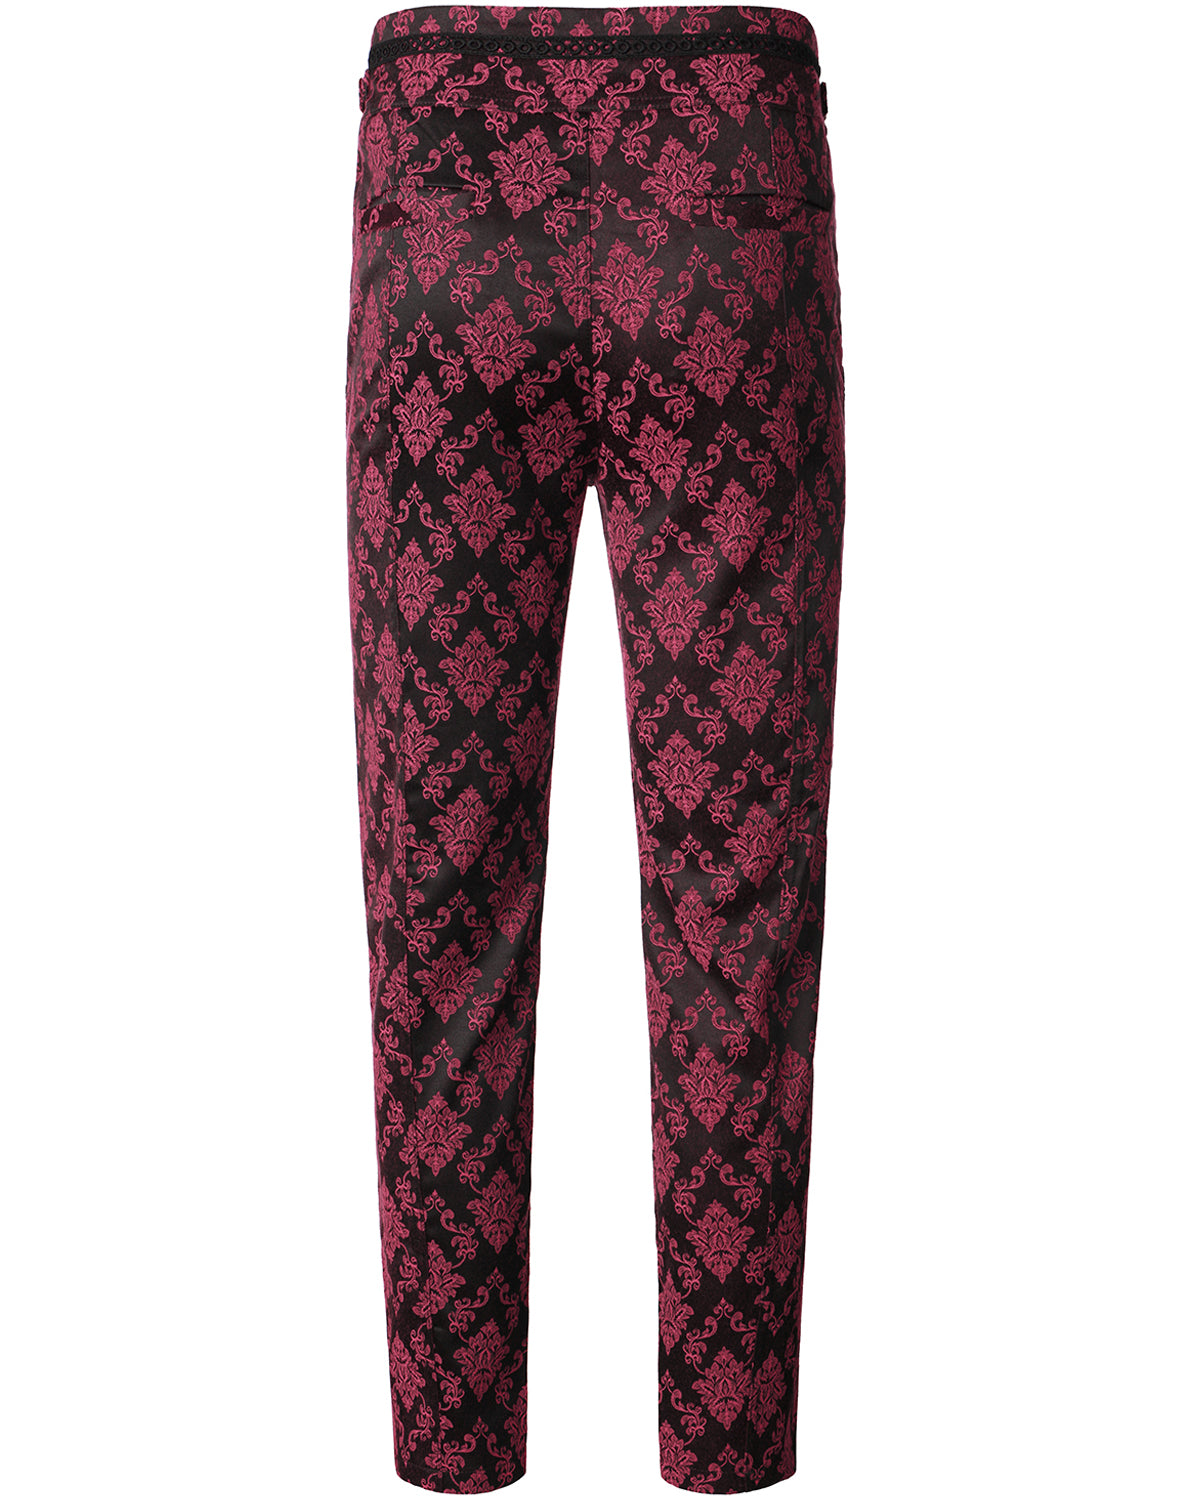 Etro Printed Casual Trousers Navy at CareOfCarl.com